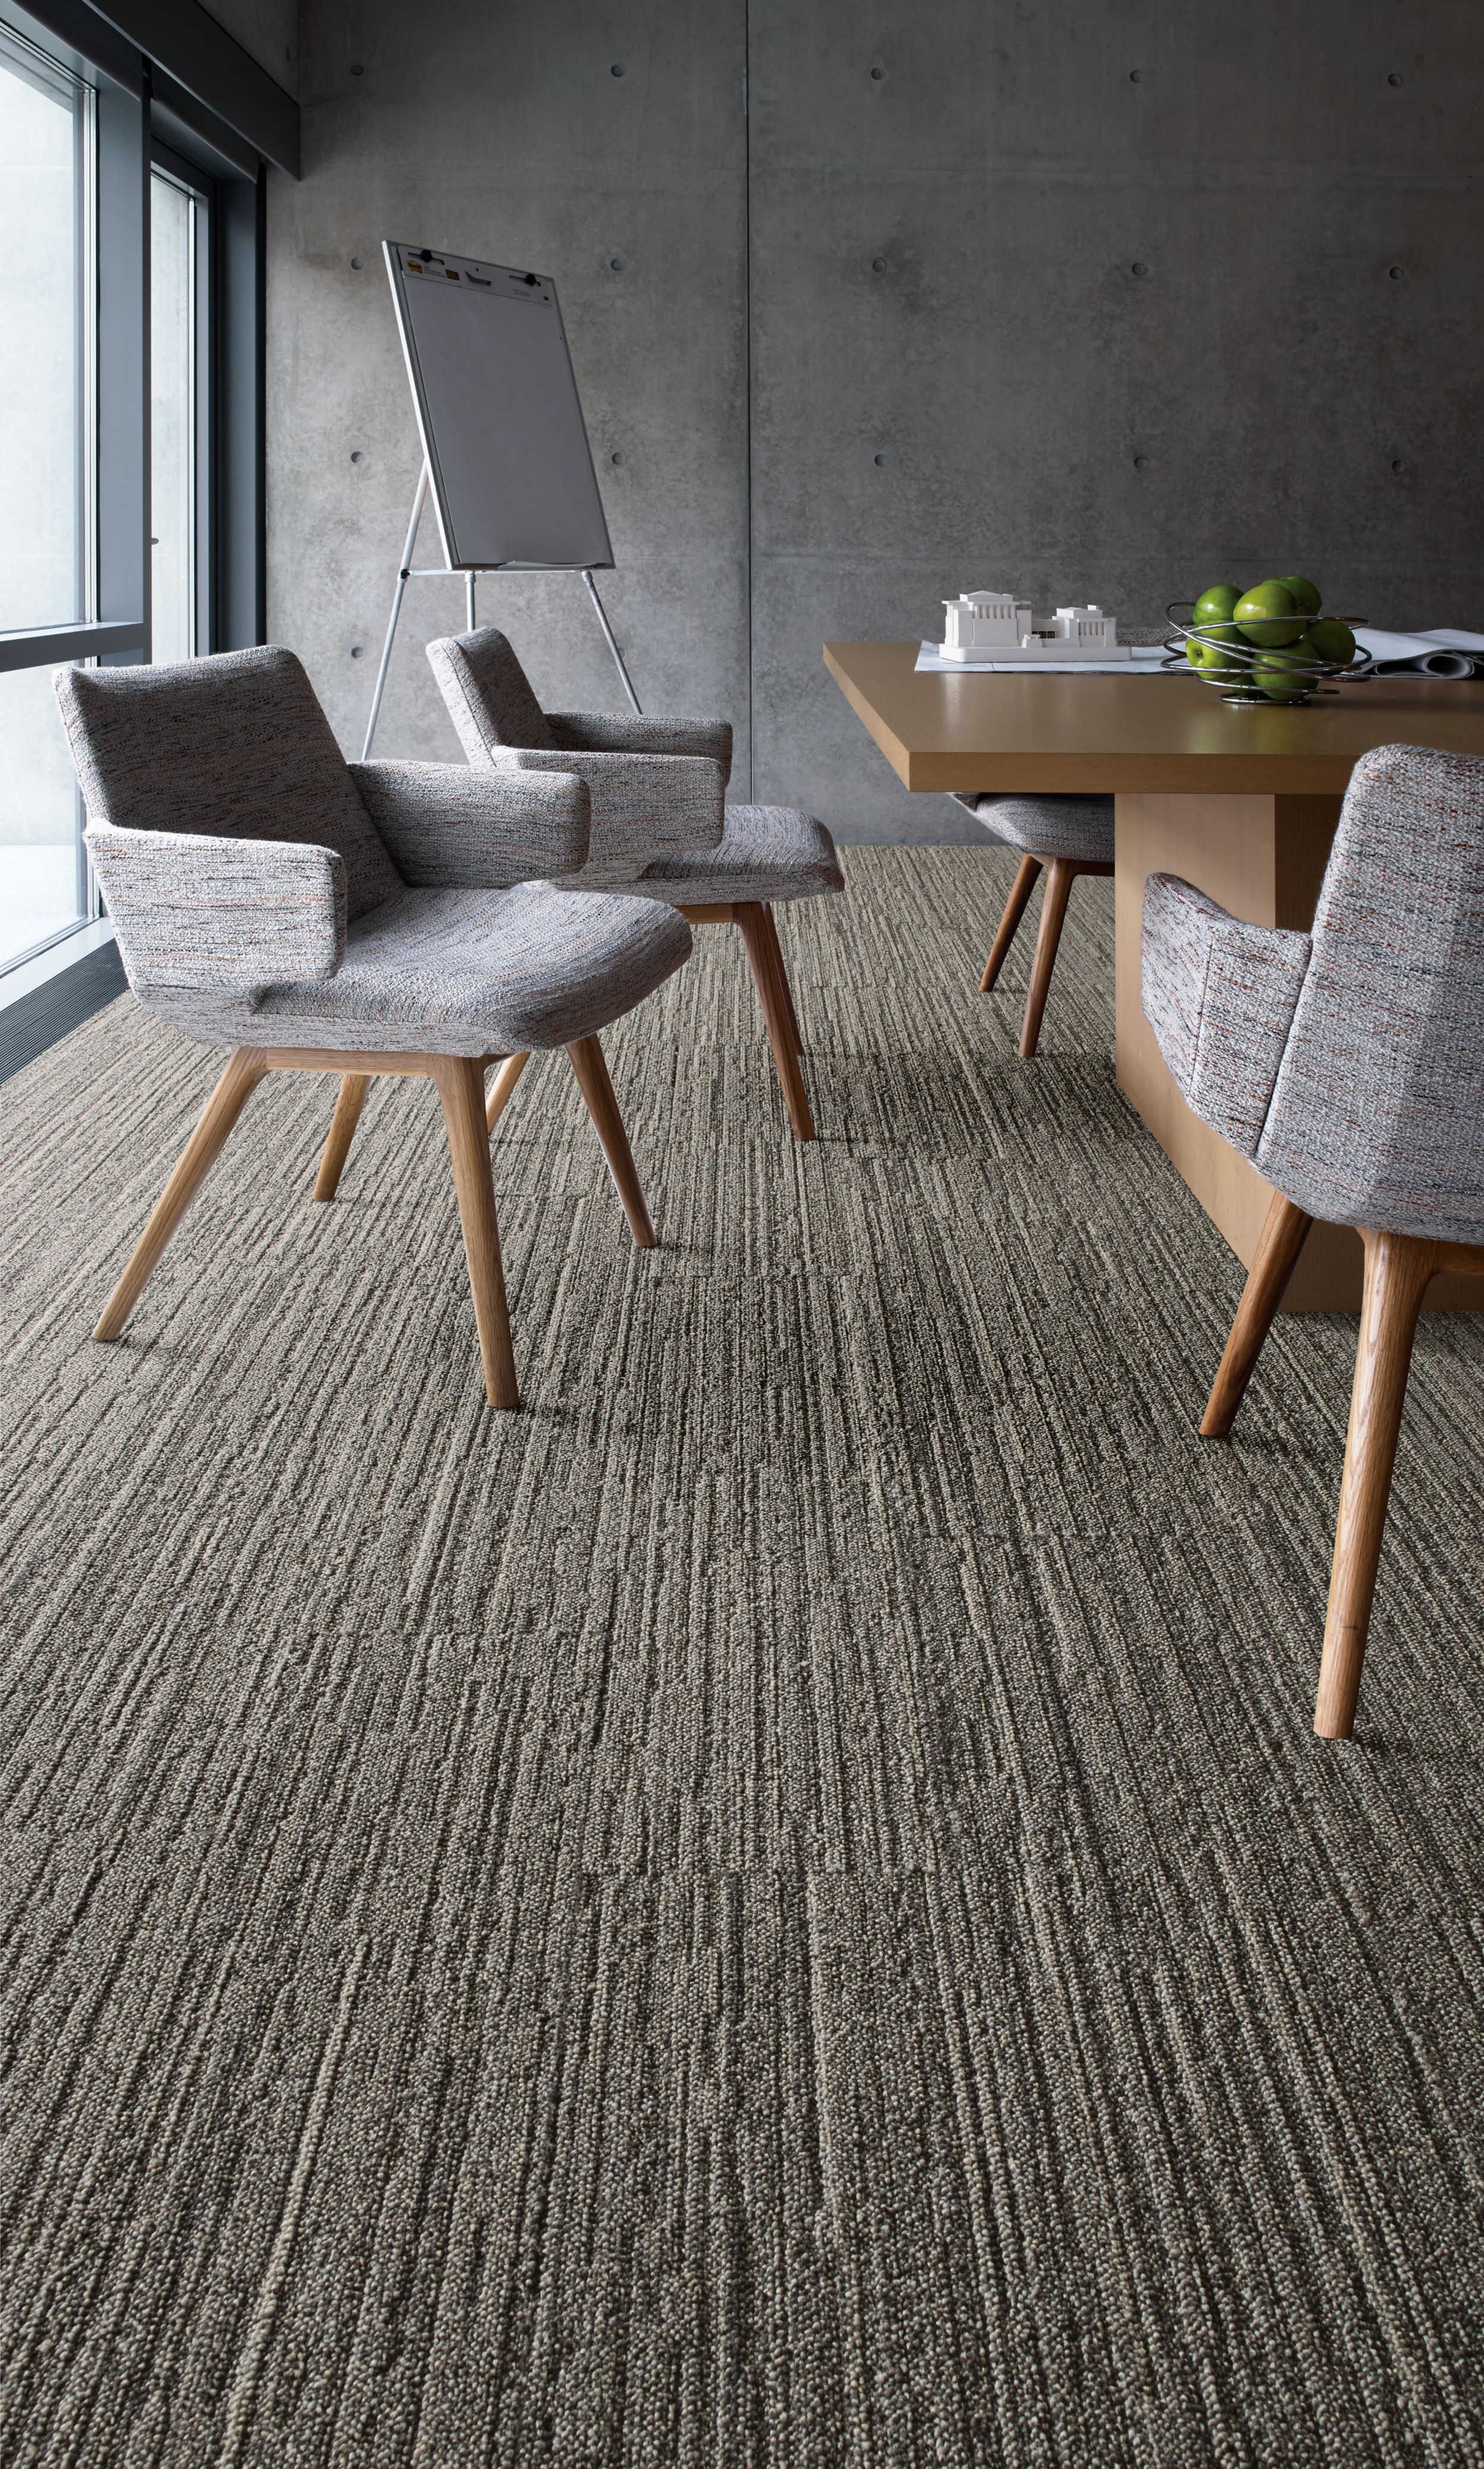 Interface WW880 plank carpet tile in meeting room with table and chairs imagen número 5